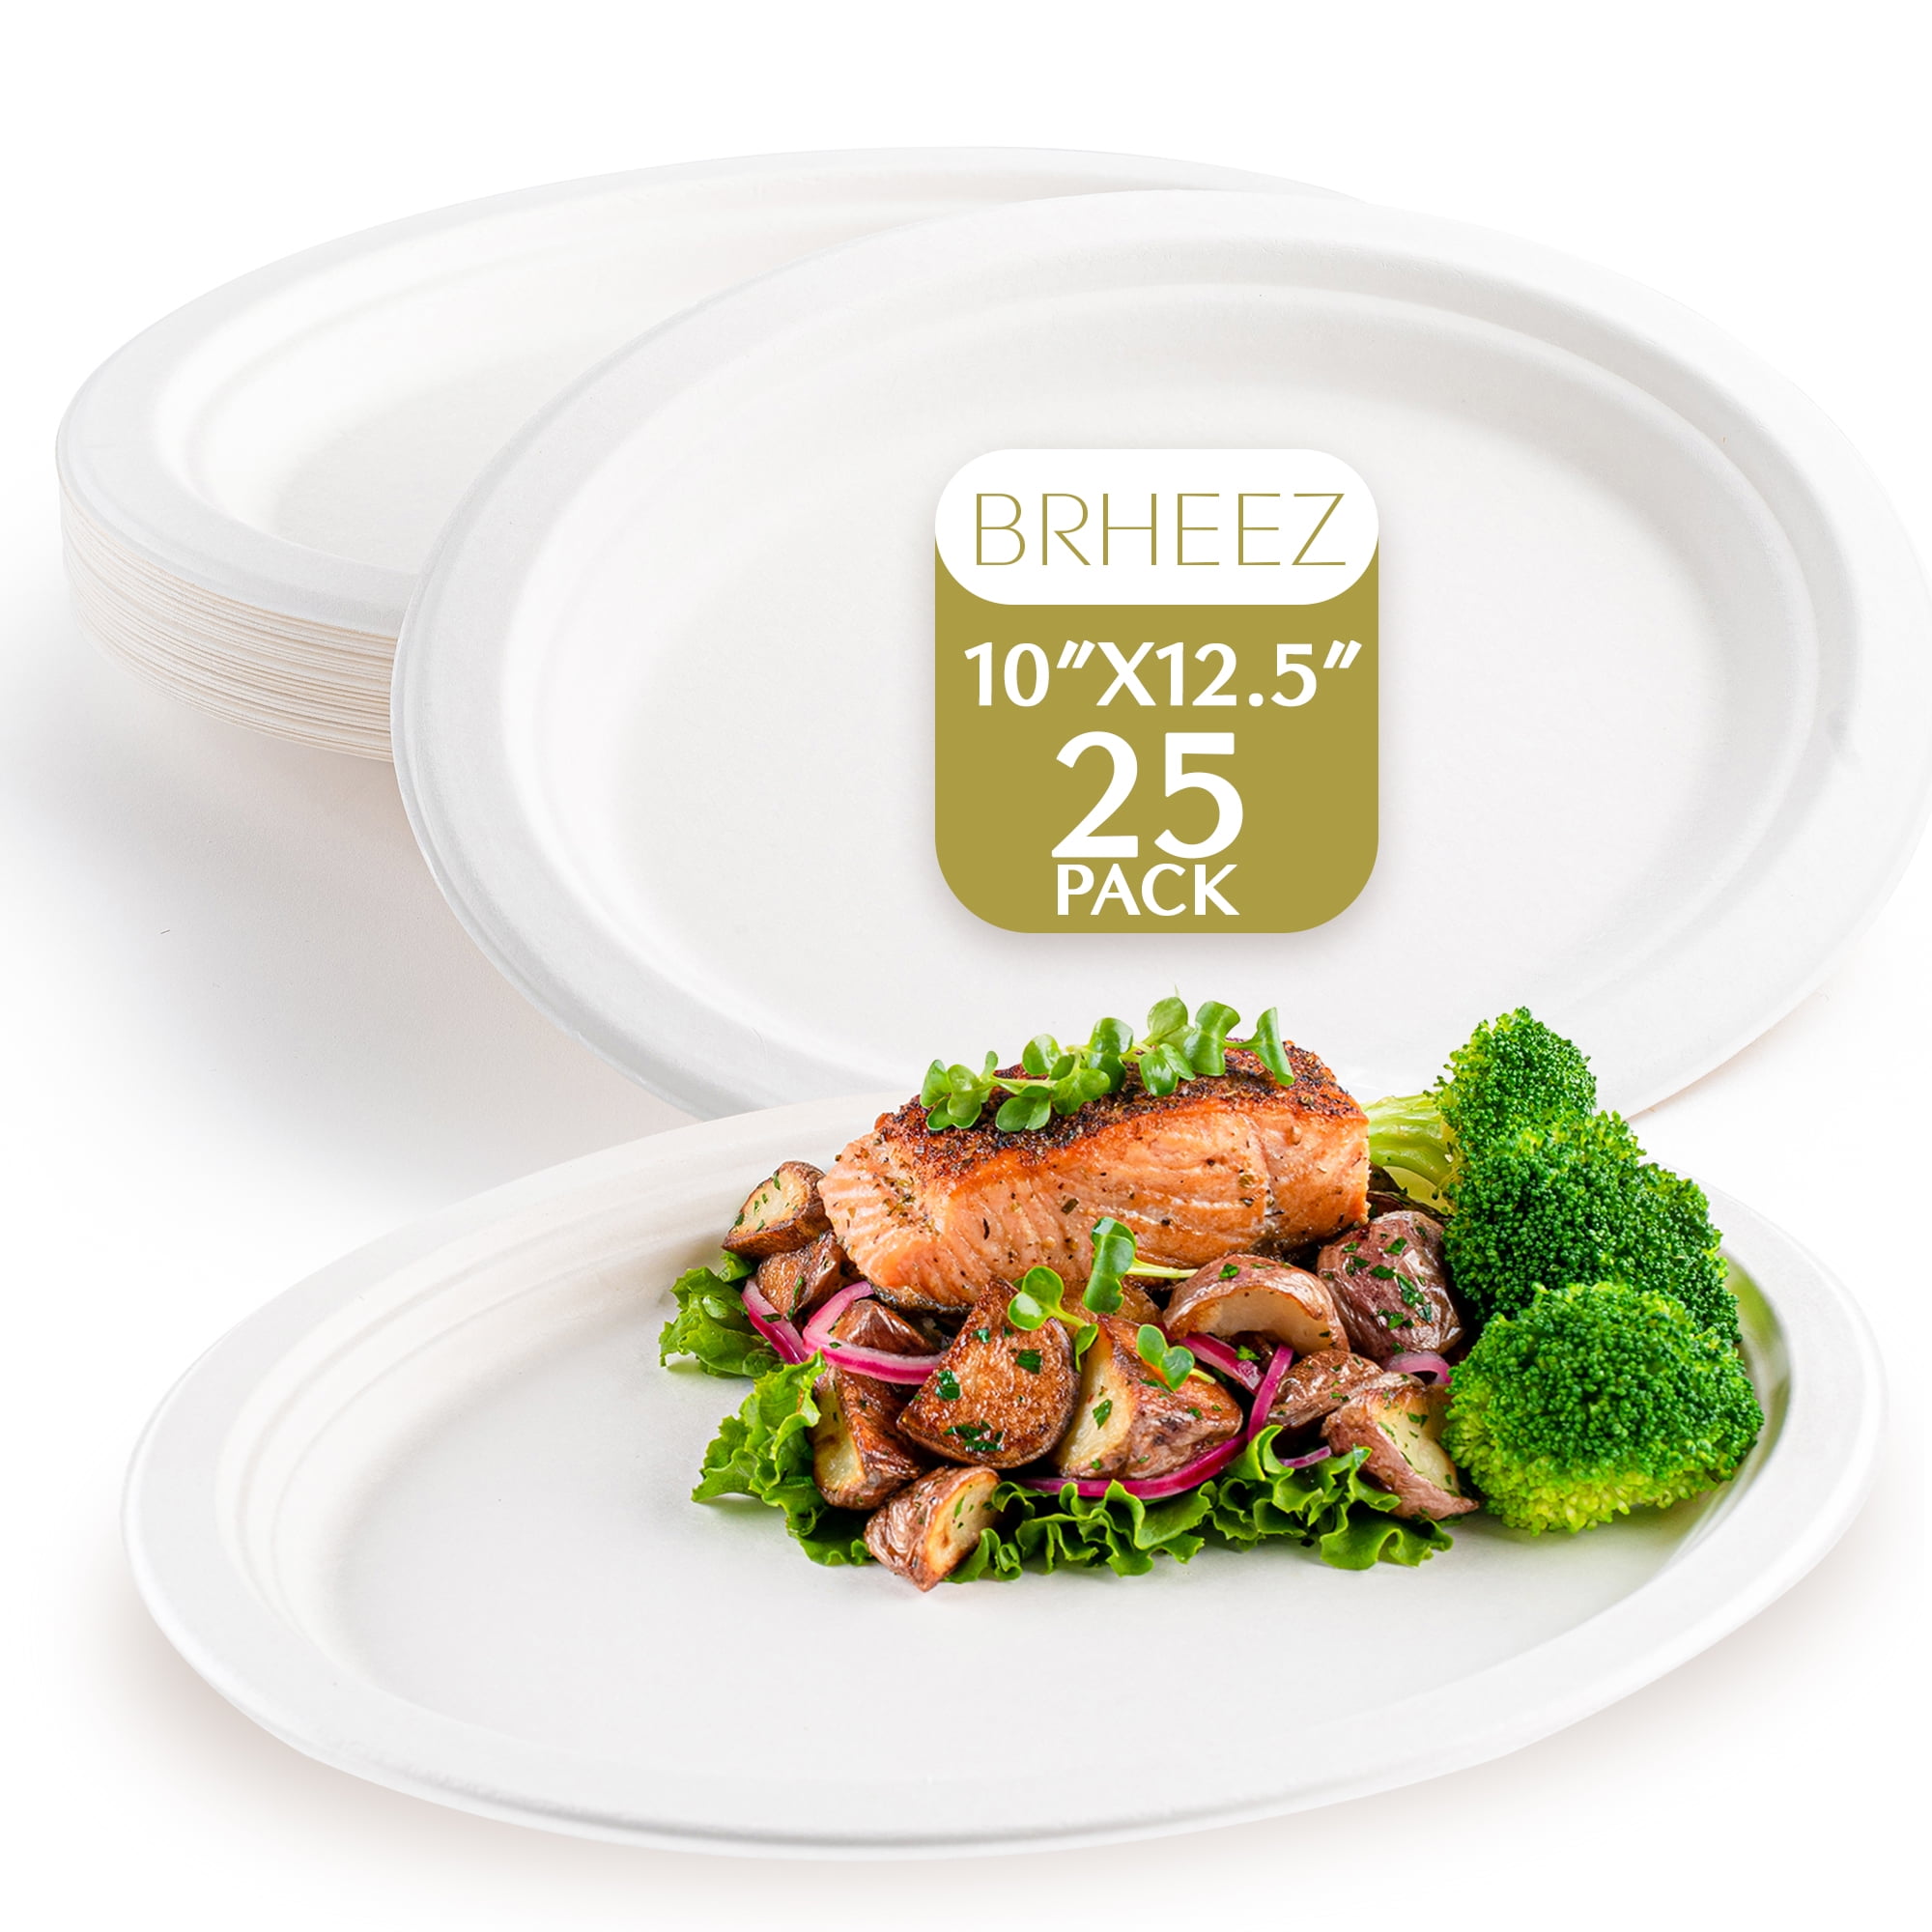  Pro-Grade, Biodegradable 10 Inch Plates. Bulk 25 Pack Great for  Lunch, Dinner Parties and Potlucks. Disposable, Compostable Wheatstraw  Paper Alternative. Sturdy, Soakproof and Microwave Safe : Health & Household